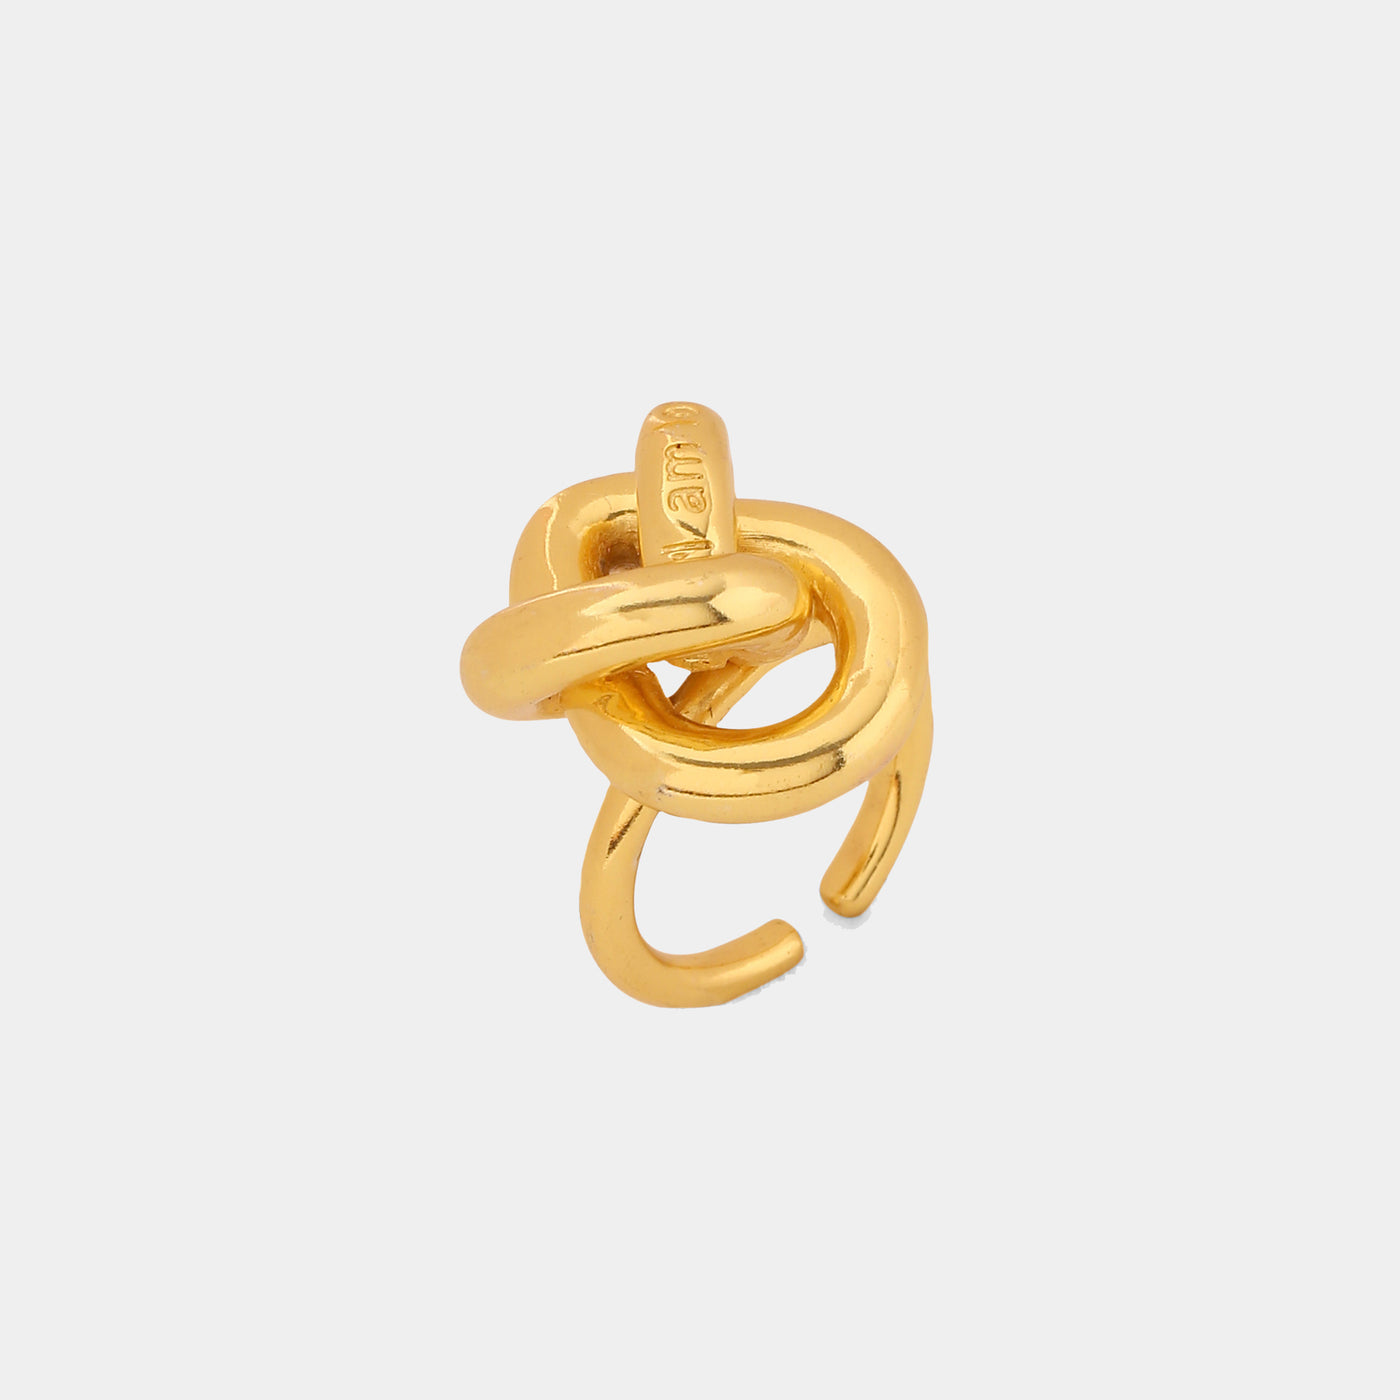 Classic Knot Ring - I'm Love in gold color with twisted knot design 